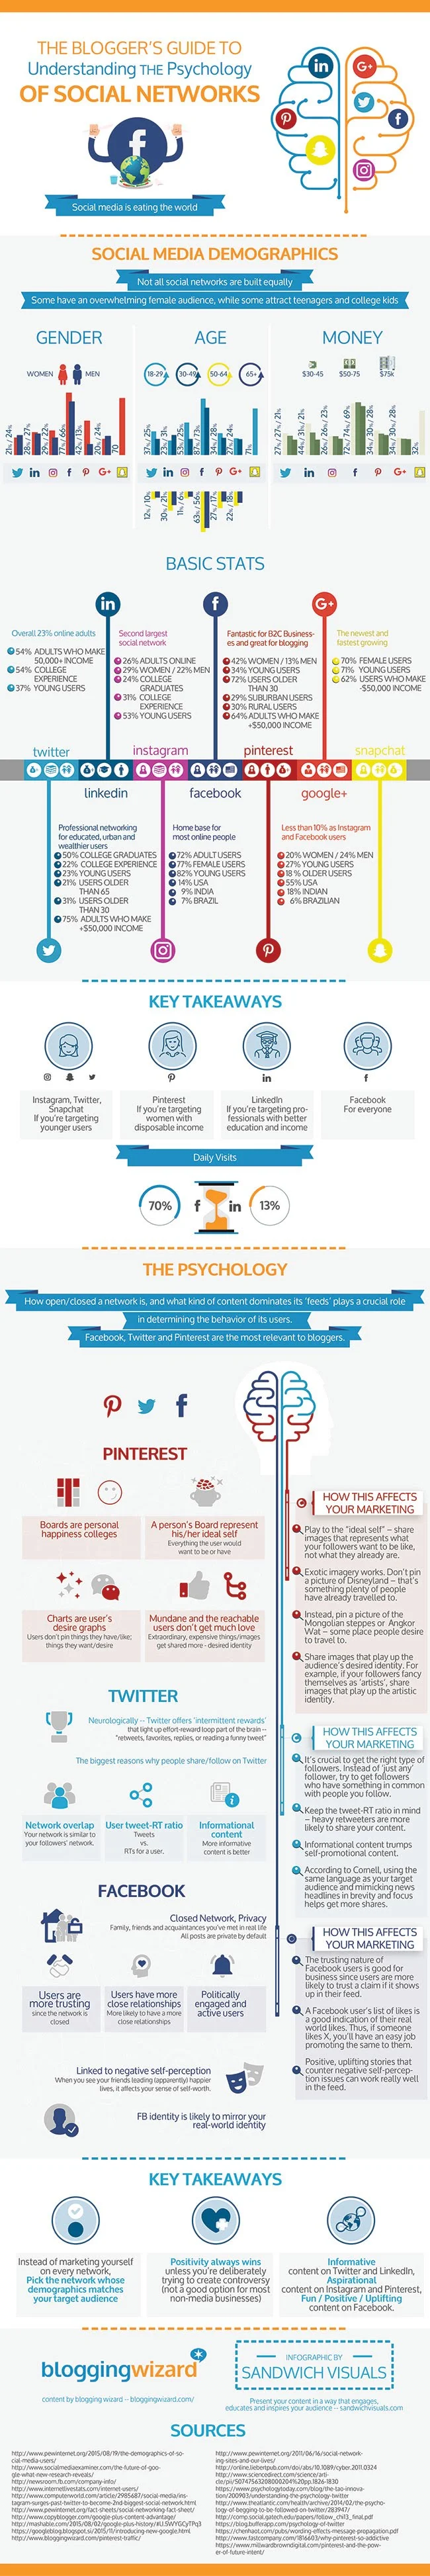 How The Psychology Of Social Networks Can Improve Your Marketing - #infographic